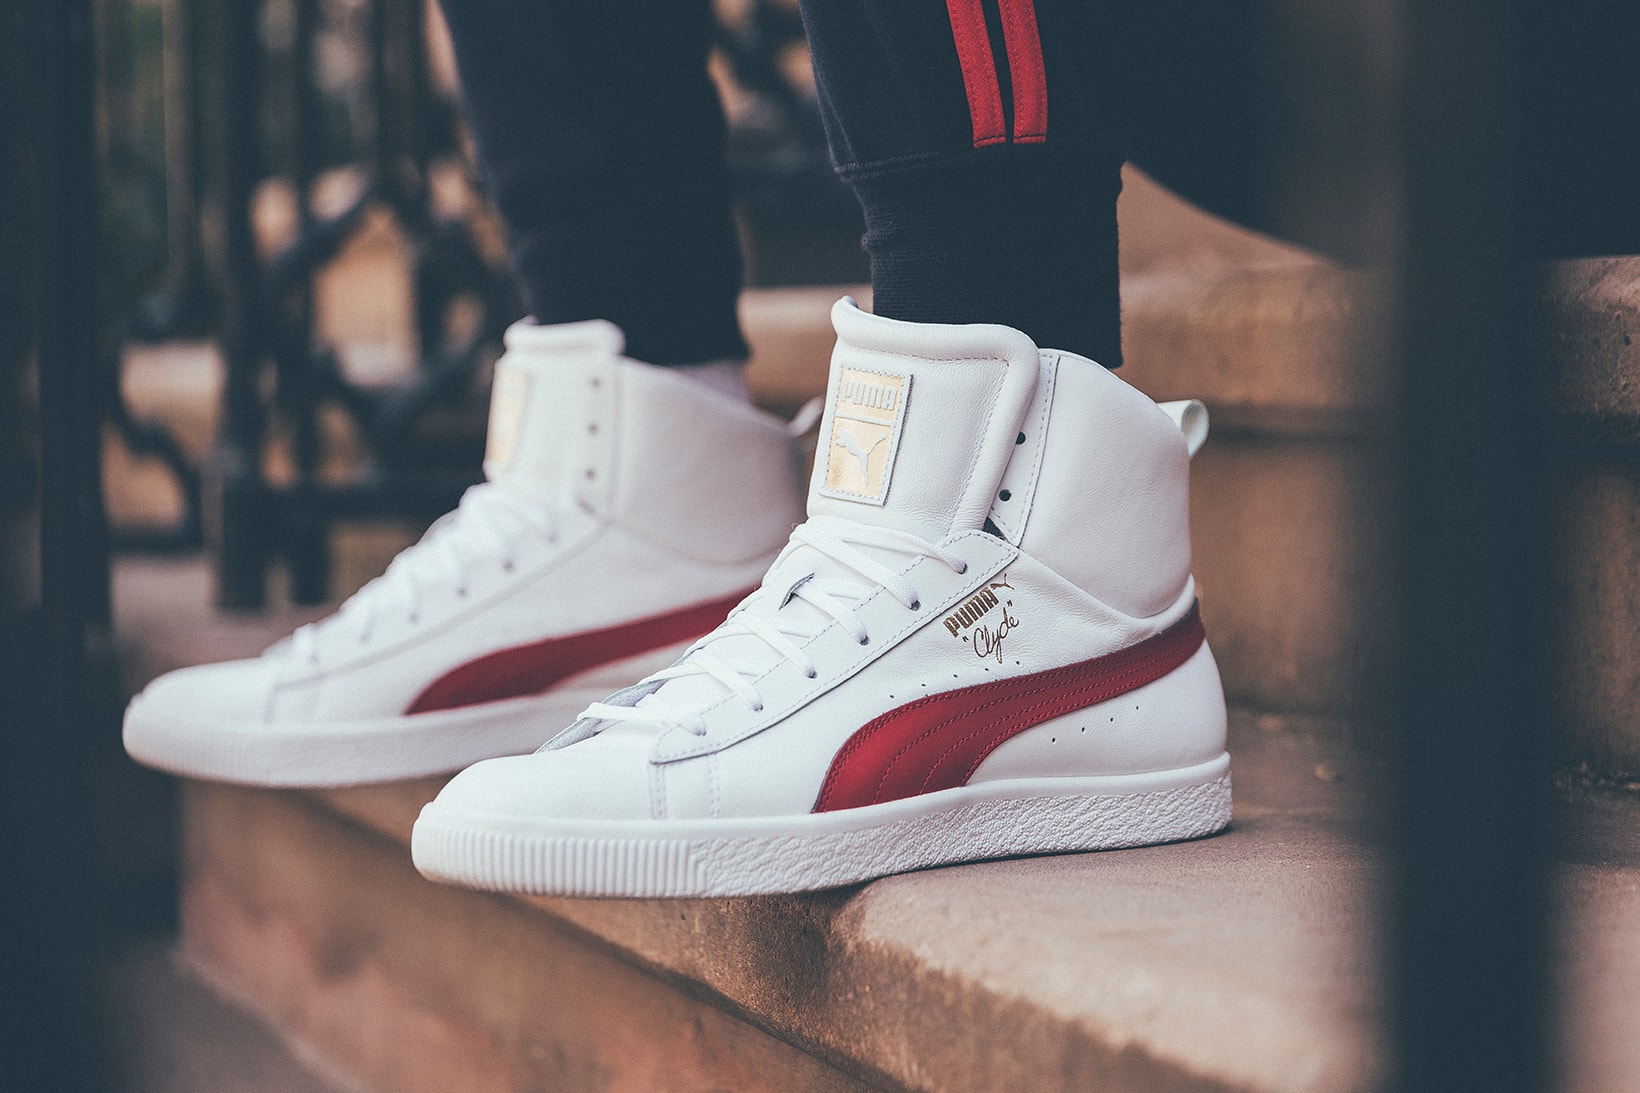 Puma Clyde Mid Foil Leather white side profile